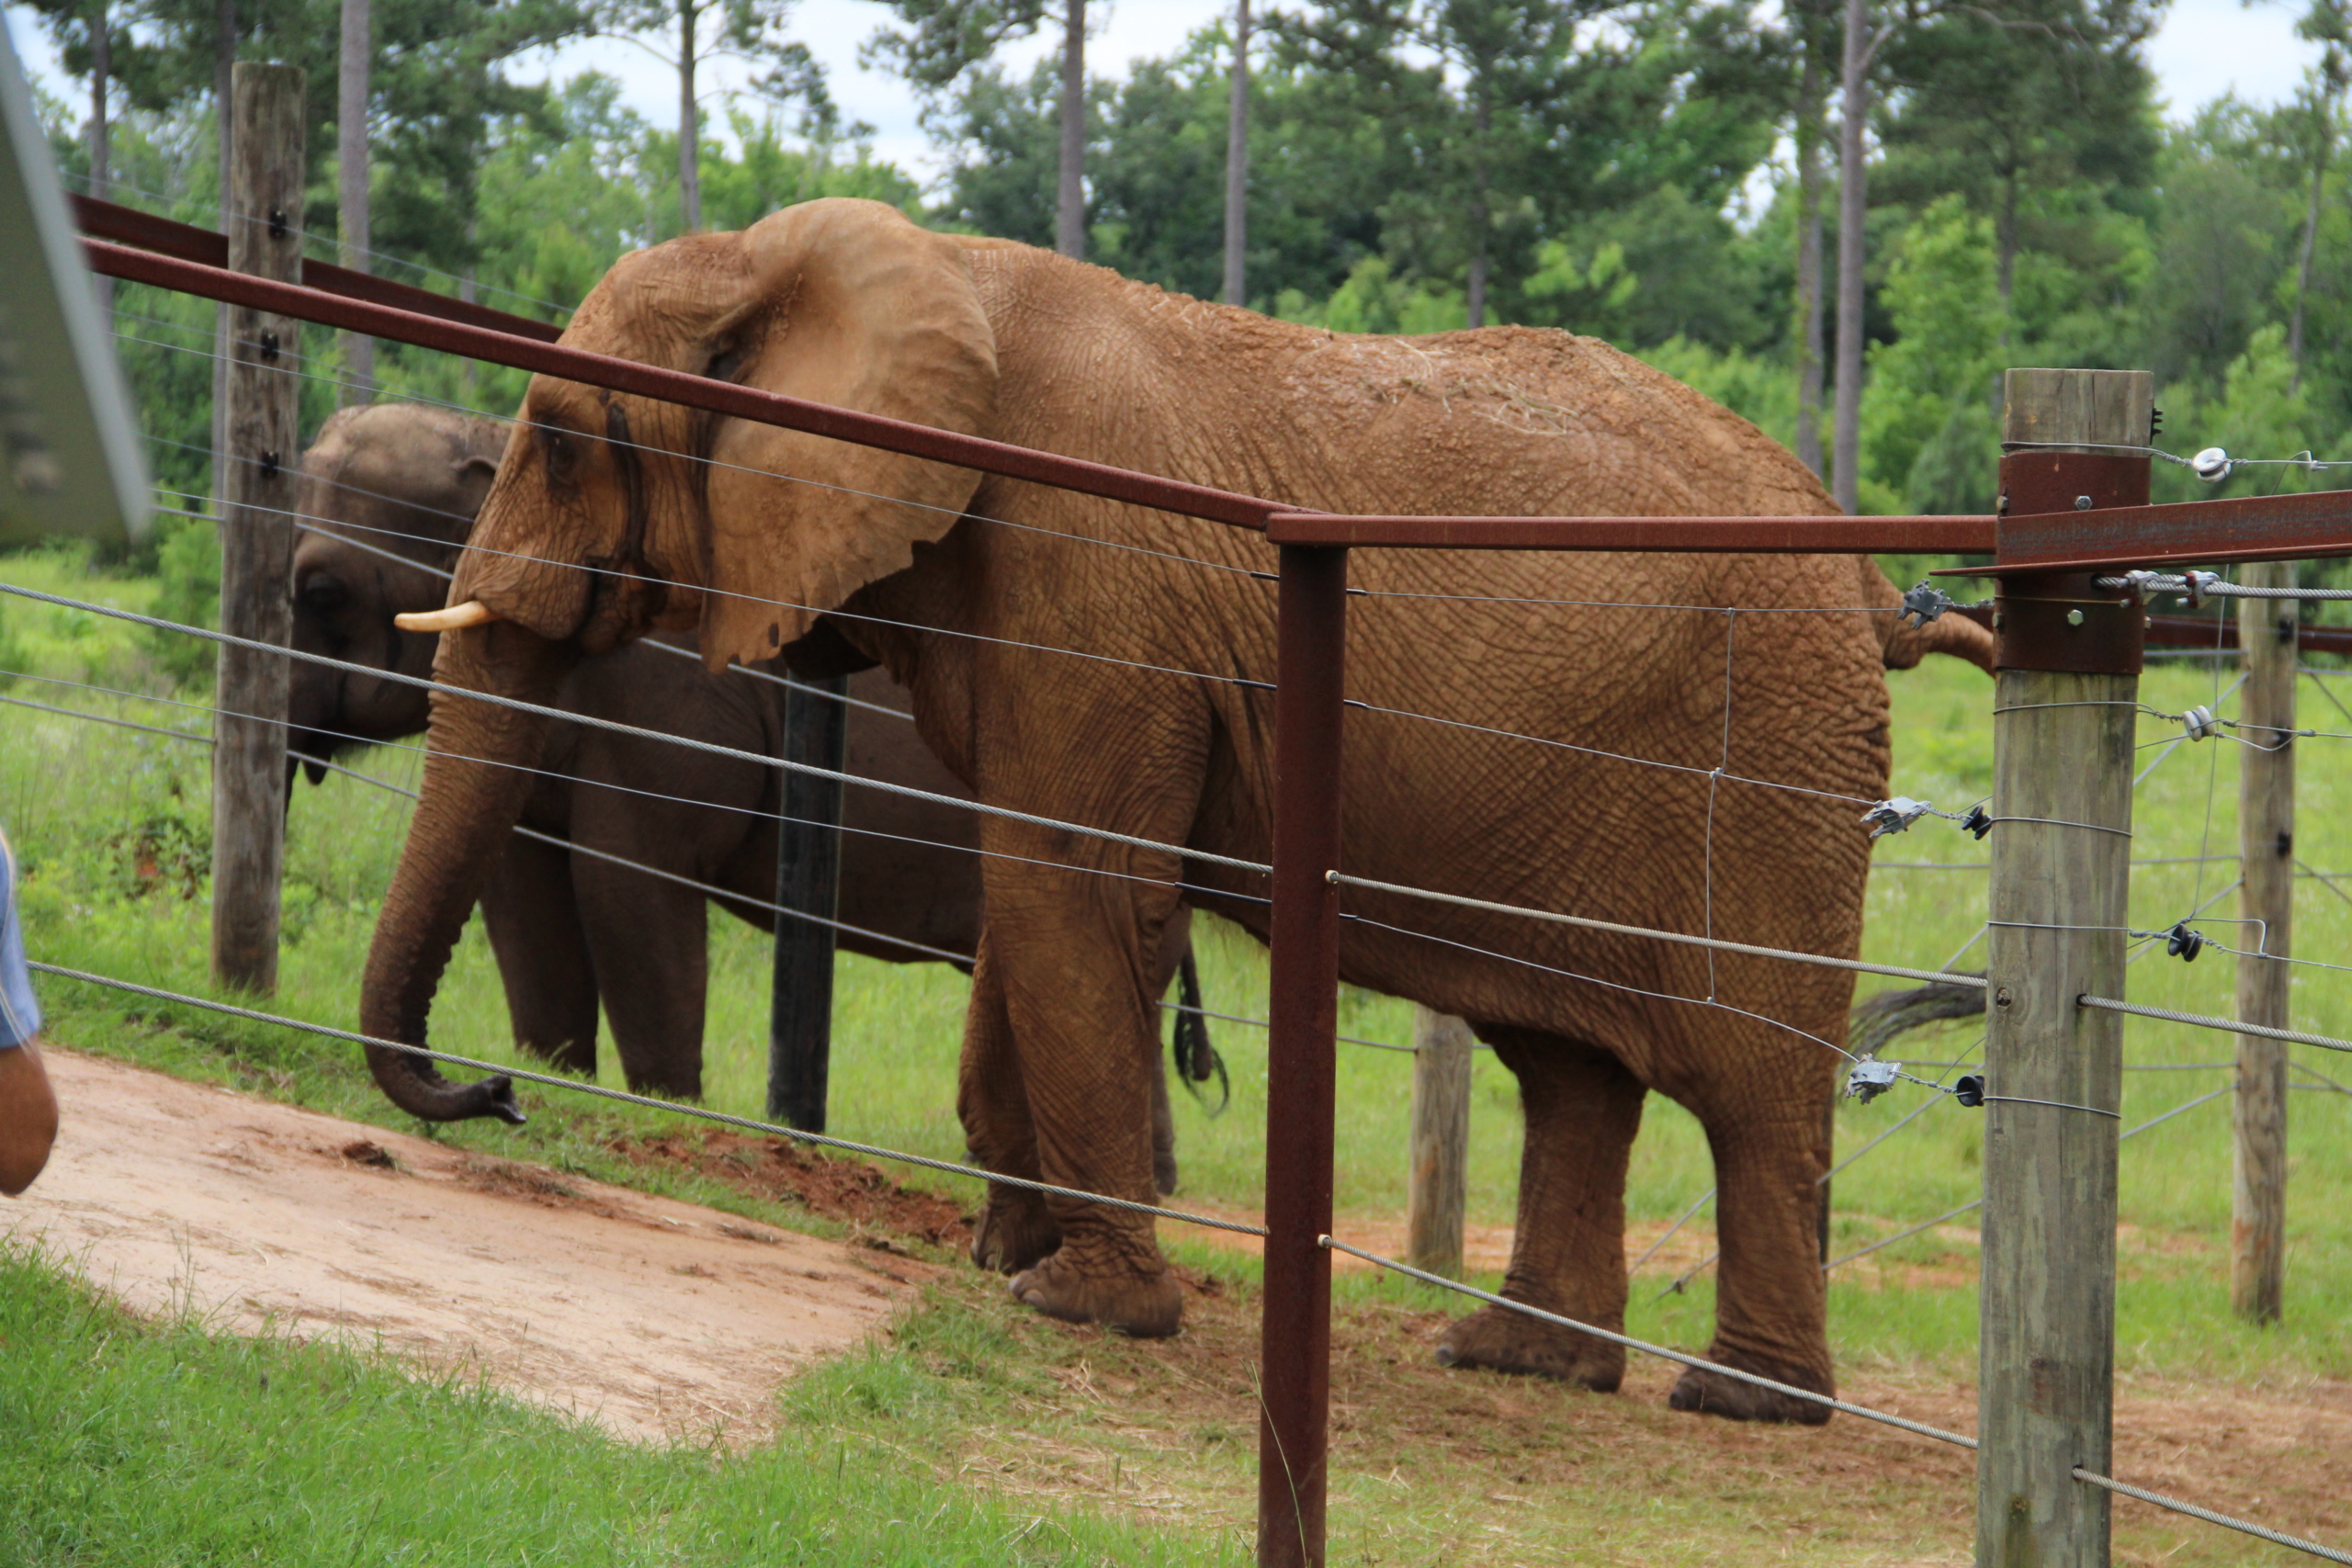 Mundi the elephant relaxes into retirement in south Georgia